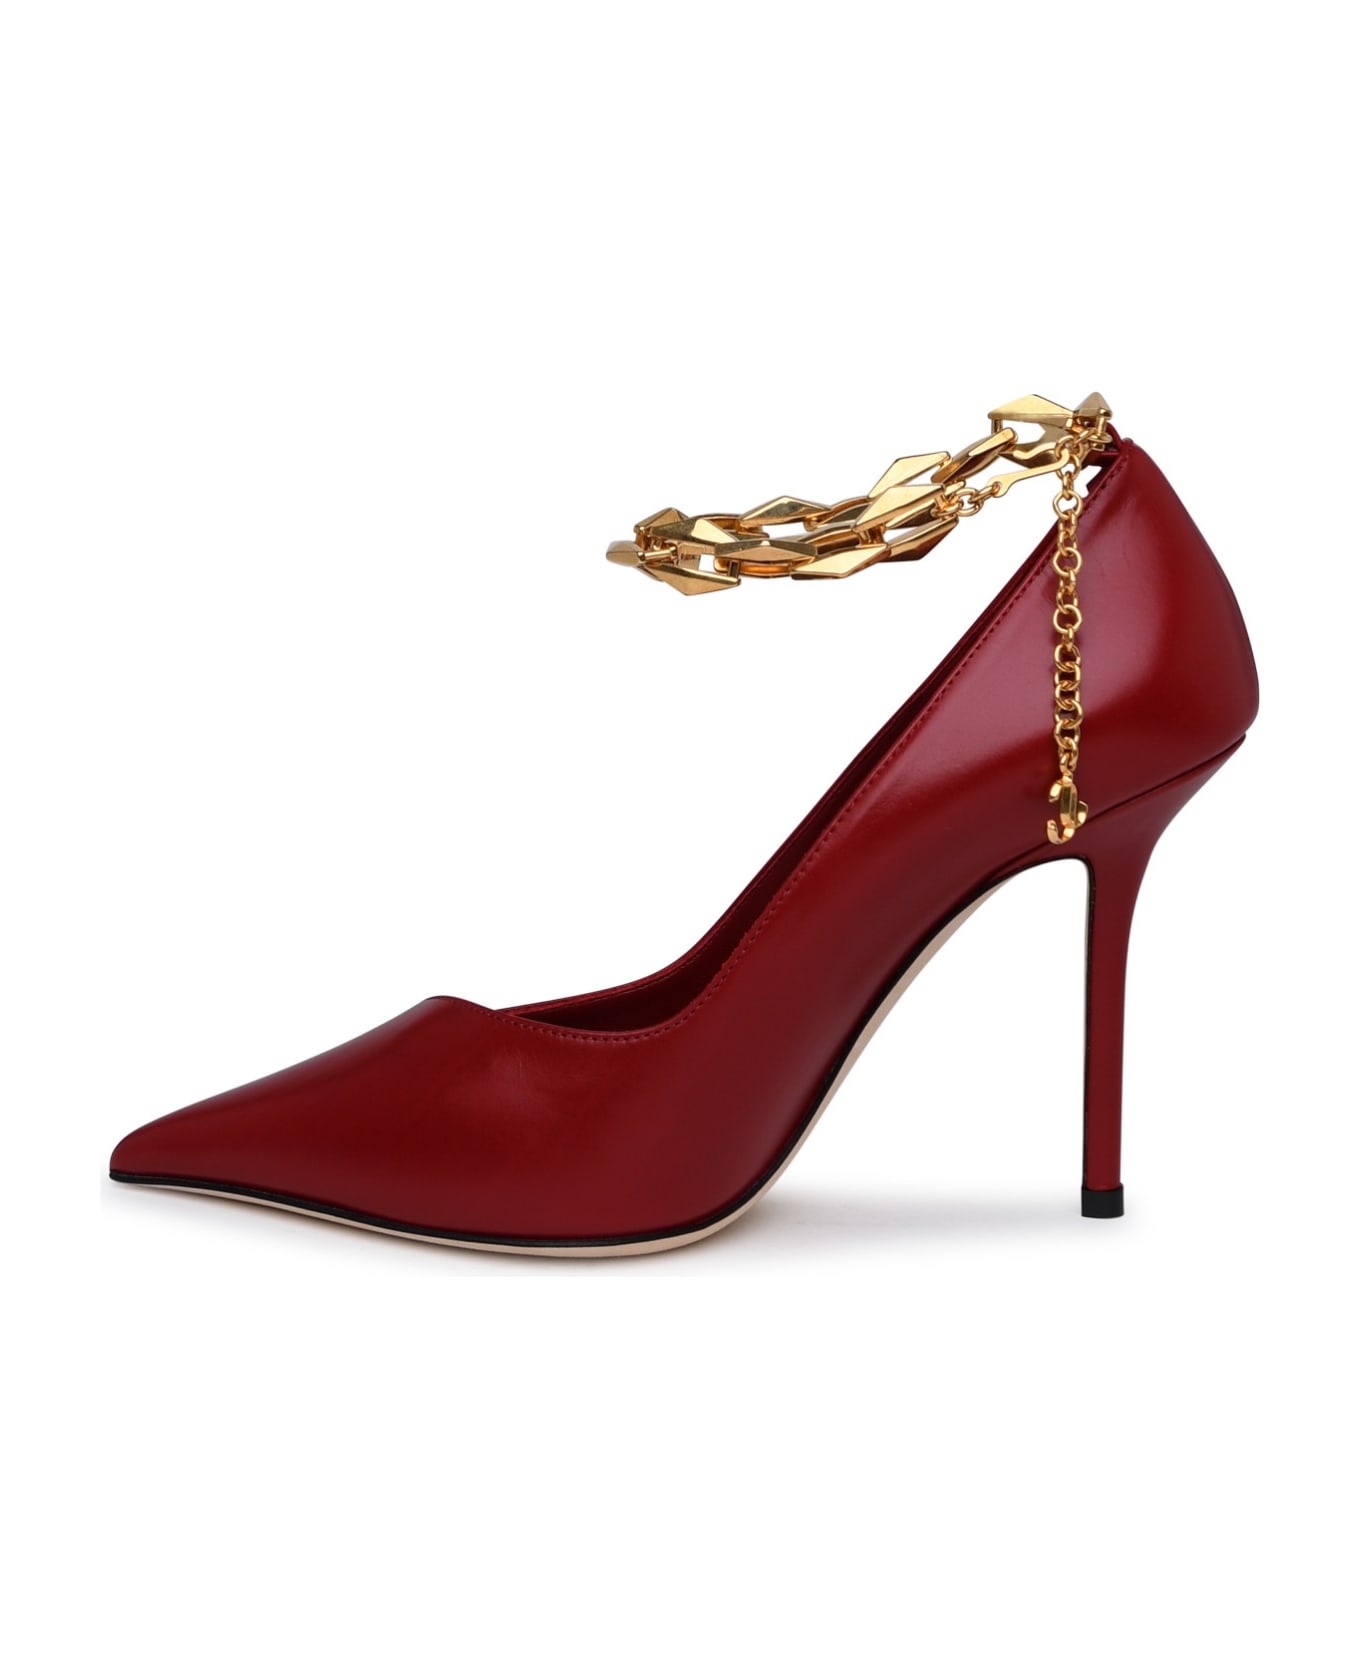 Jimmy Choo Diamond Pumps In Red Leather - Red ハイヒール